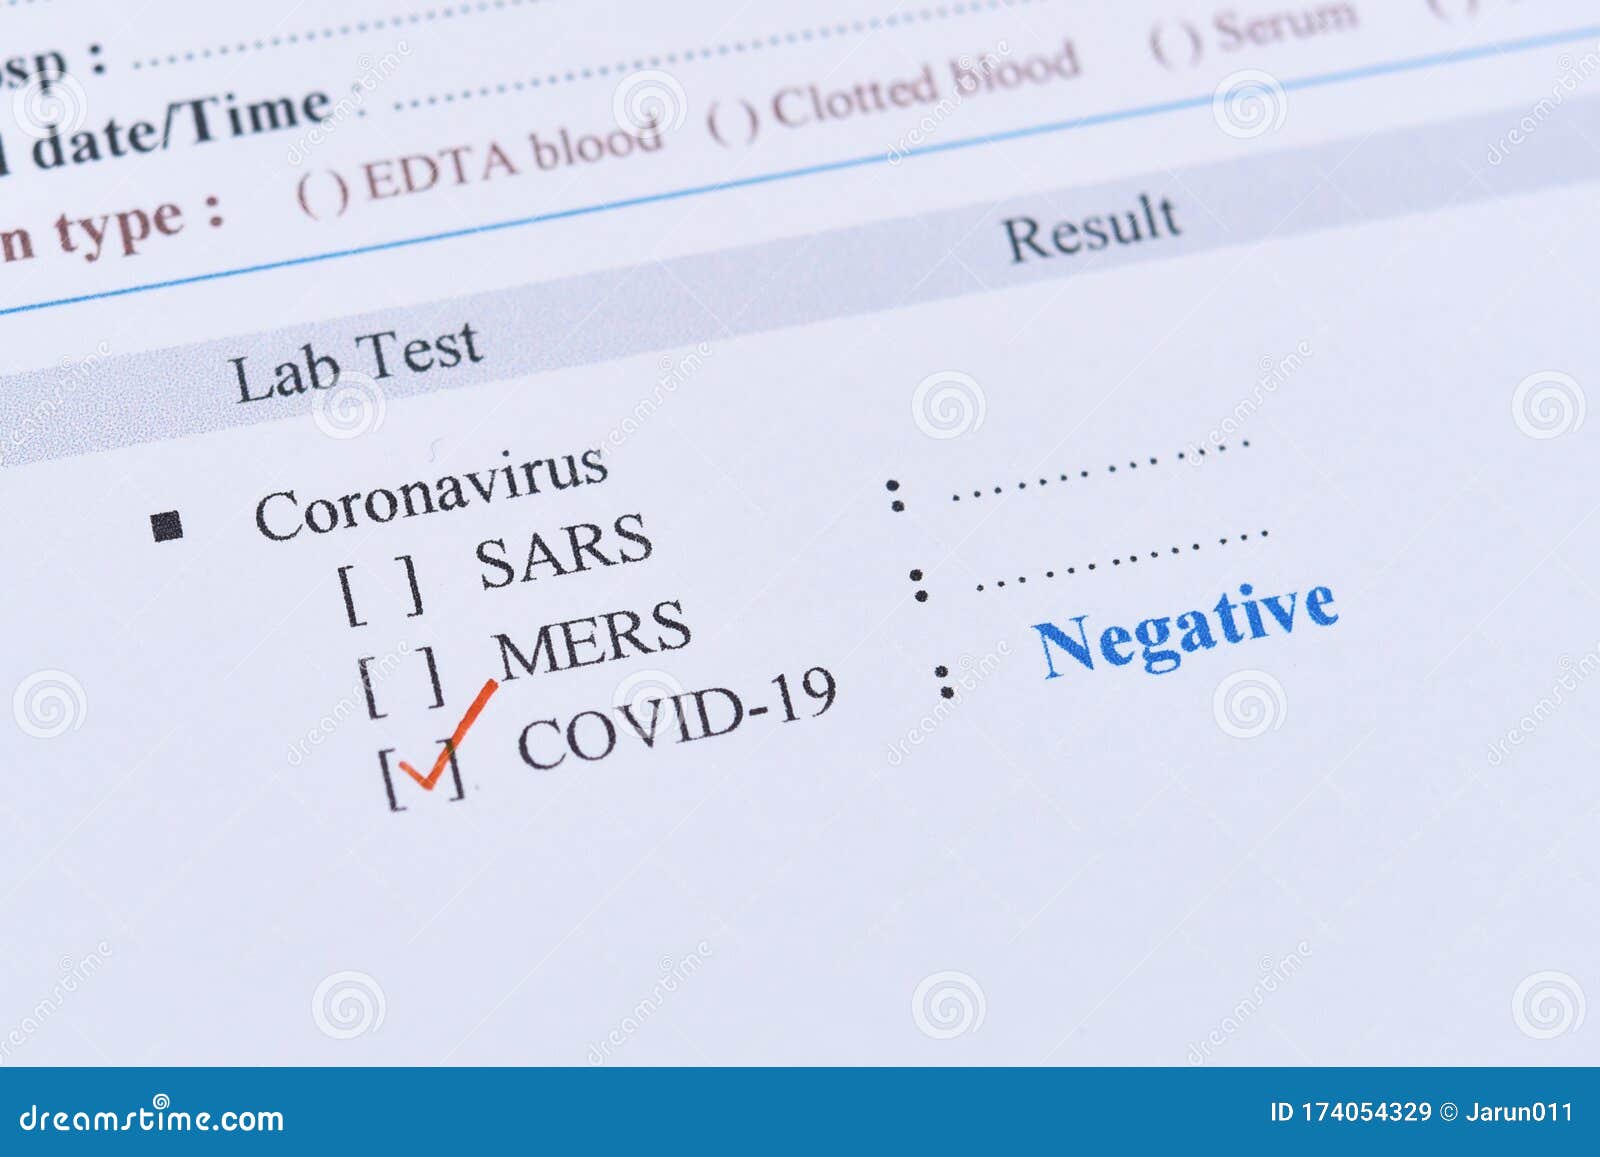 25+ Covid Test Results Negative Picture Pictures